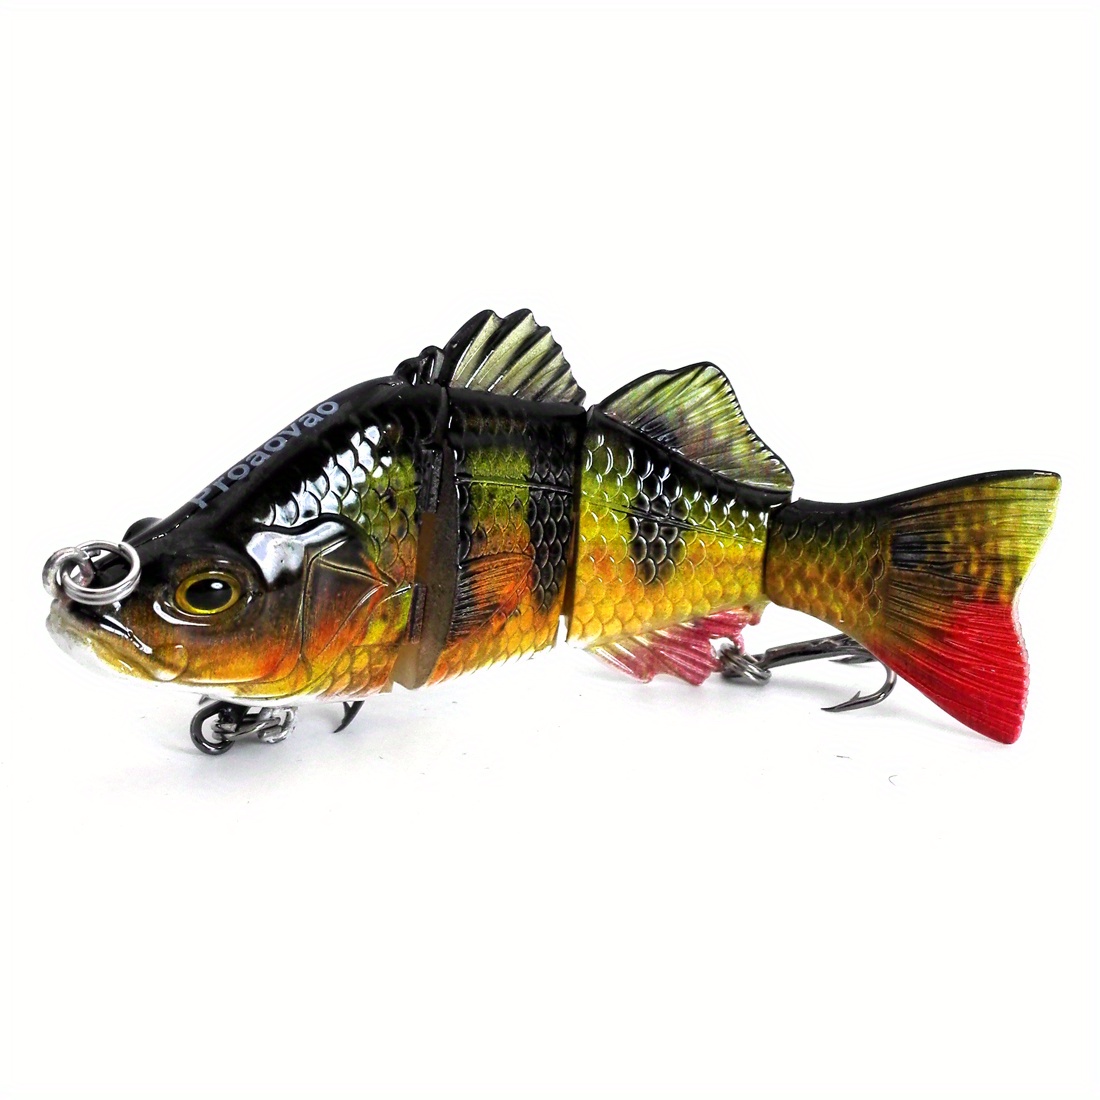  BESPORTBLE Lure Lure Bass Trout Lures Fishing Spoons Lures  Hard swimbait Saltwater Fishing Lures Hard Fishing Lures Trout Spoons Salt  Water spinnerbait Fixture Plastic Metal to Rotate : Sports 